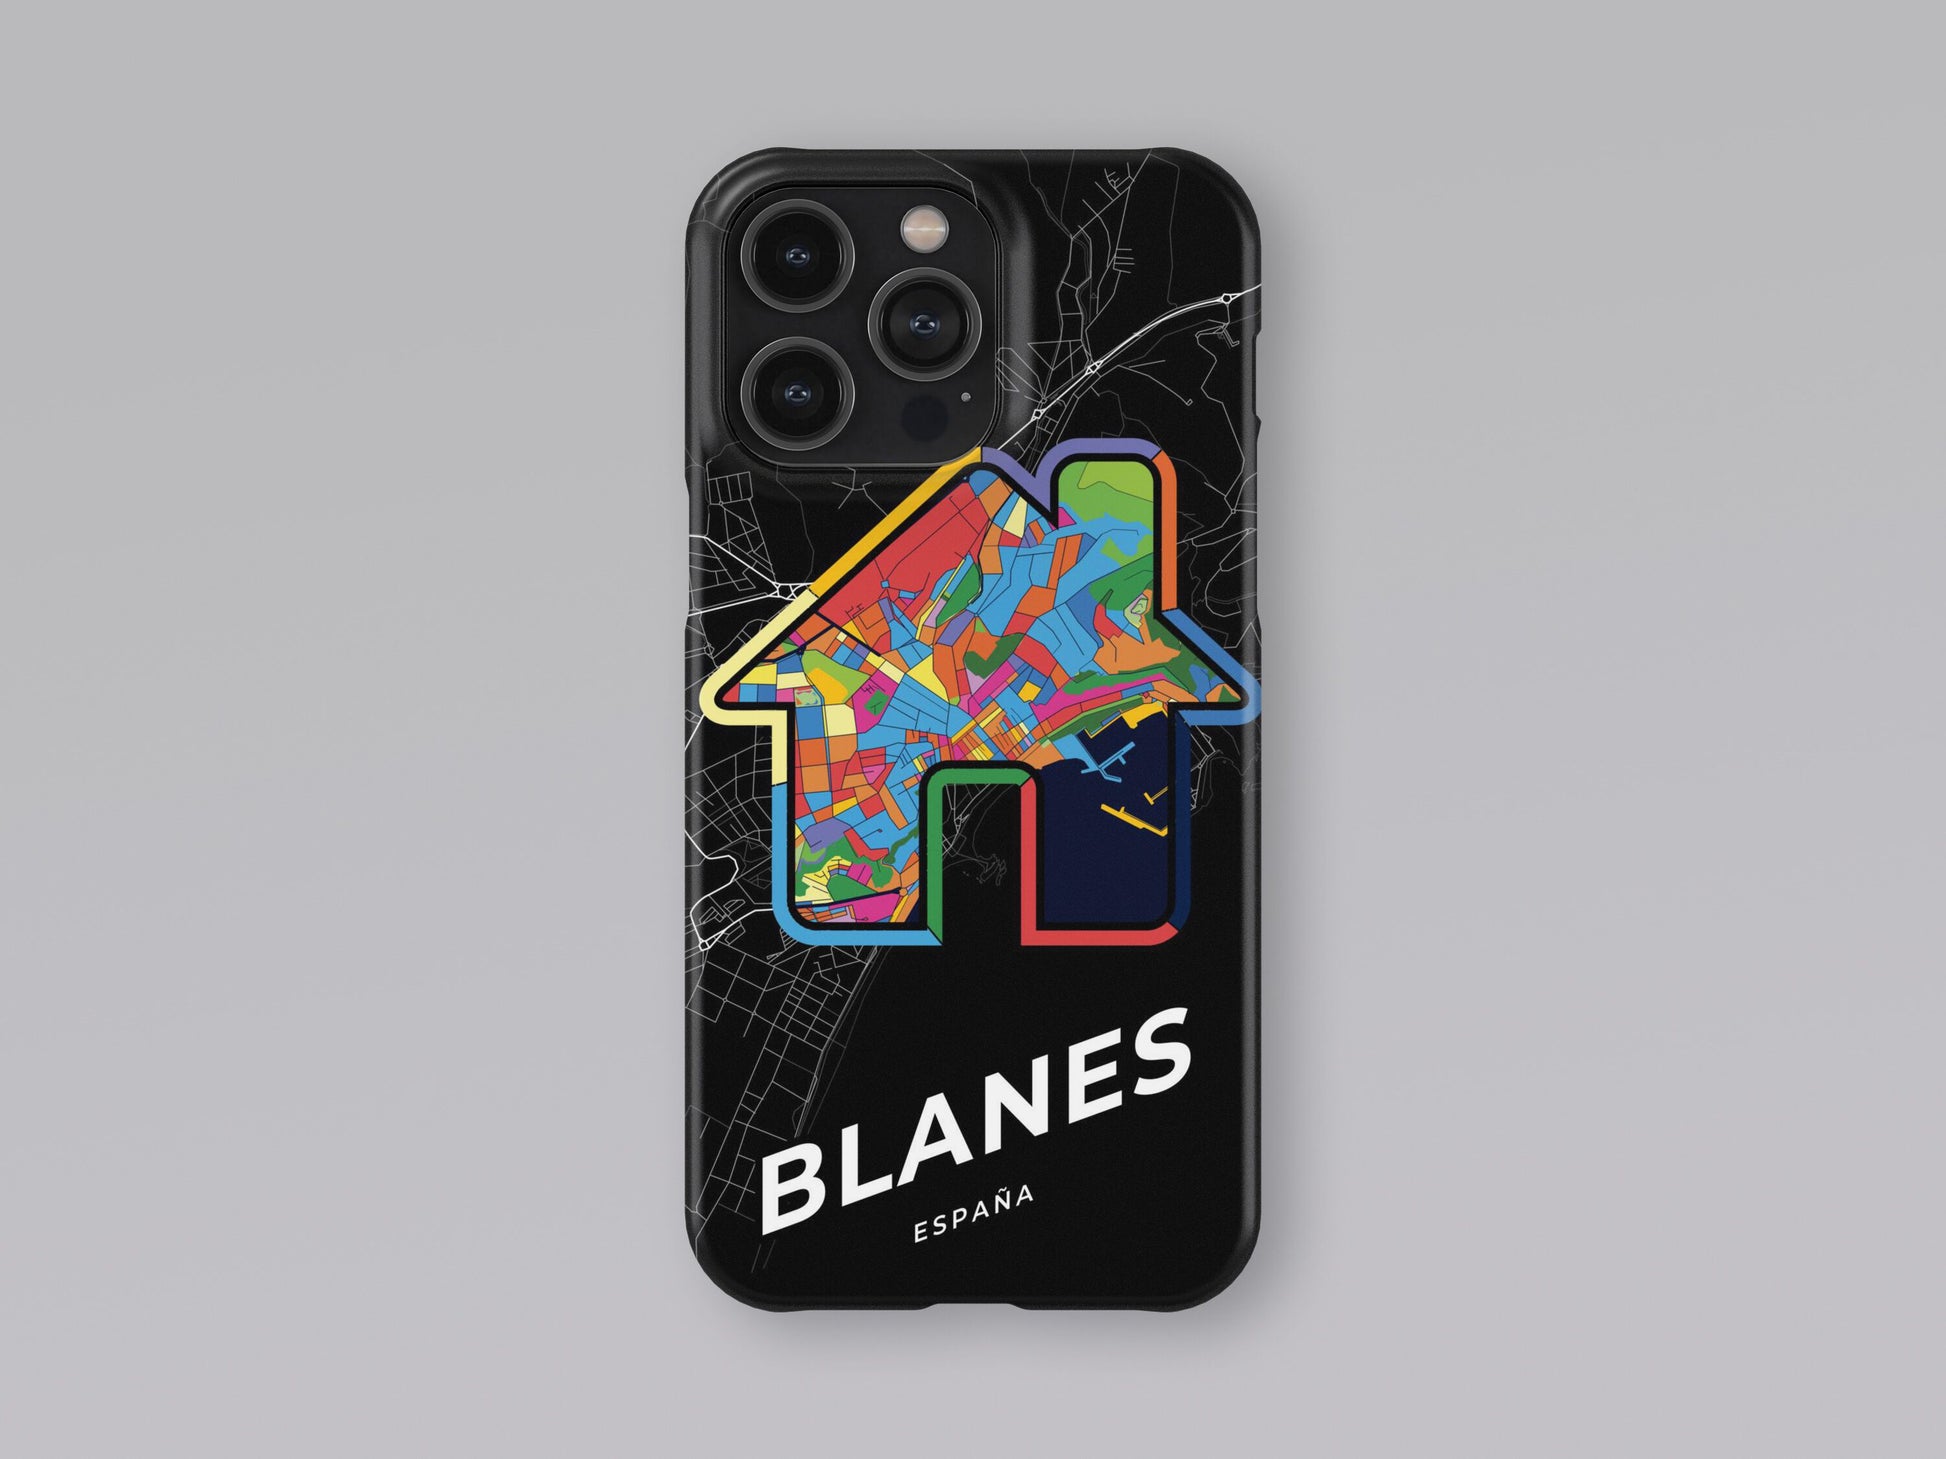 Blanes Spain slim phone case with colorful icon. Birthday, wedding or housewarming gift. Couple match cases. 3